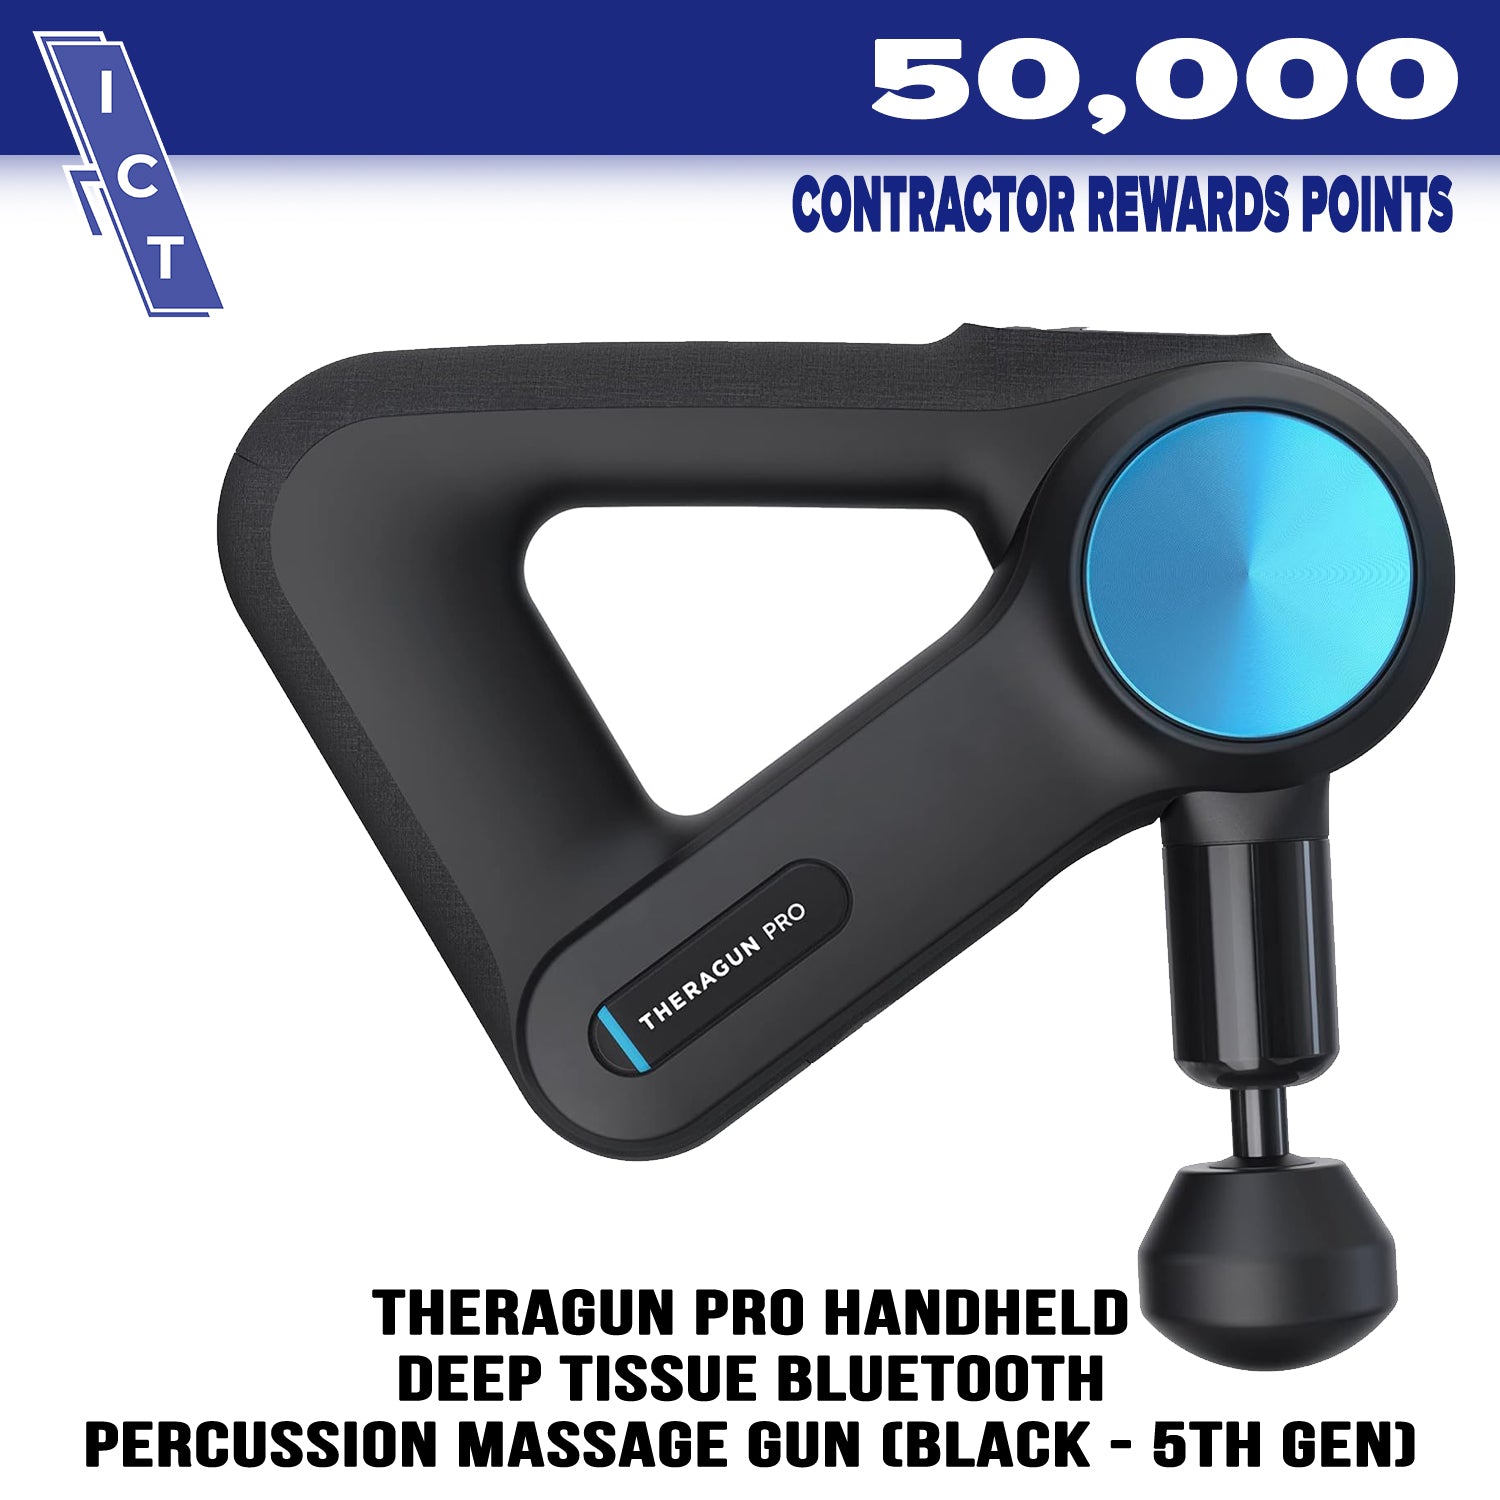 Theragun Pro massager prize for 50,000 points